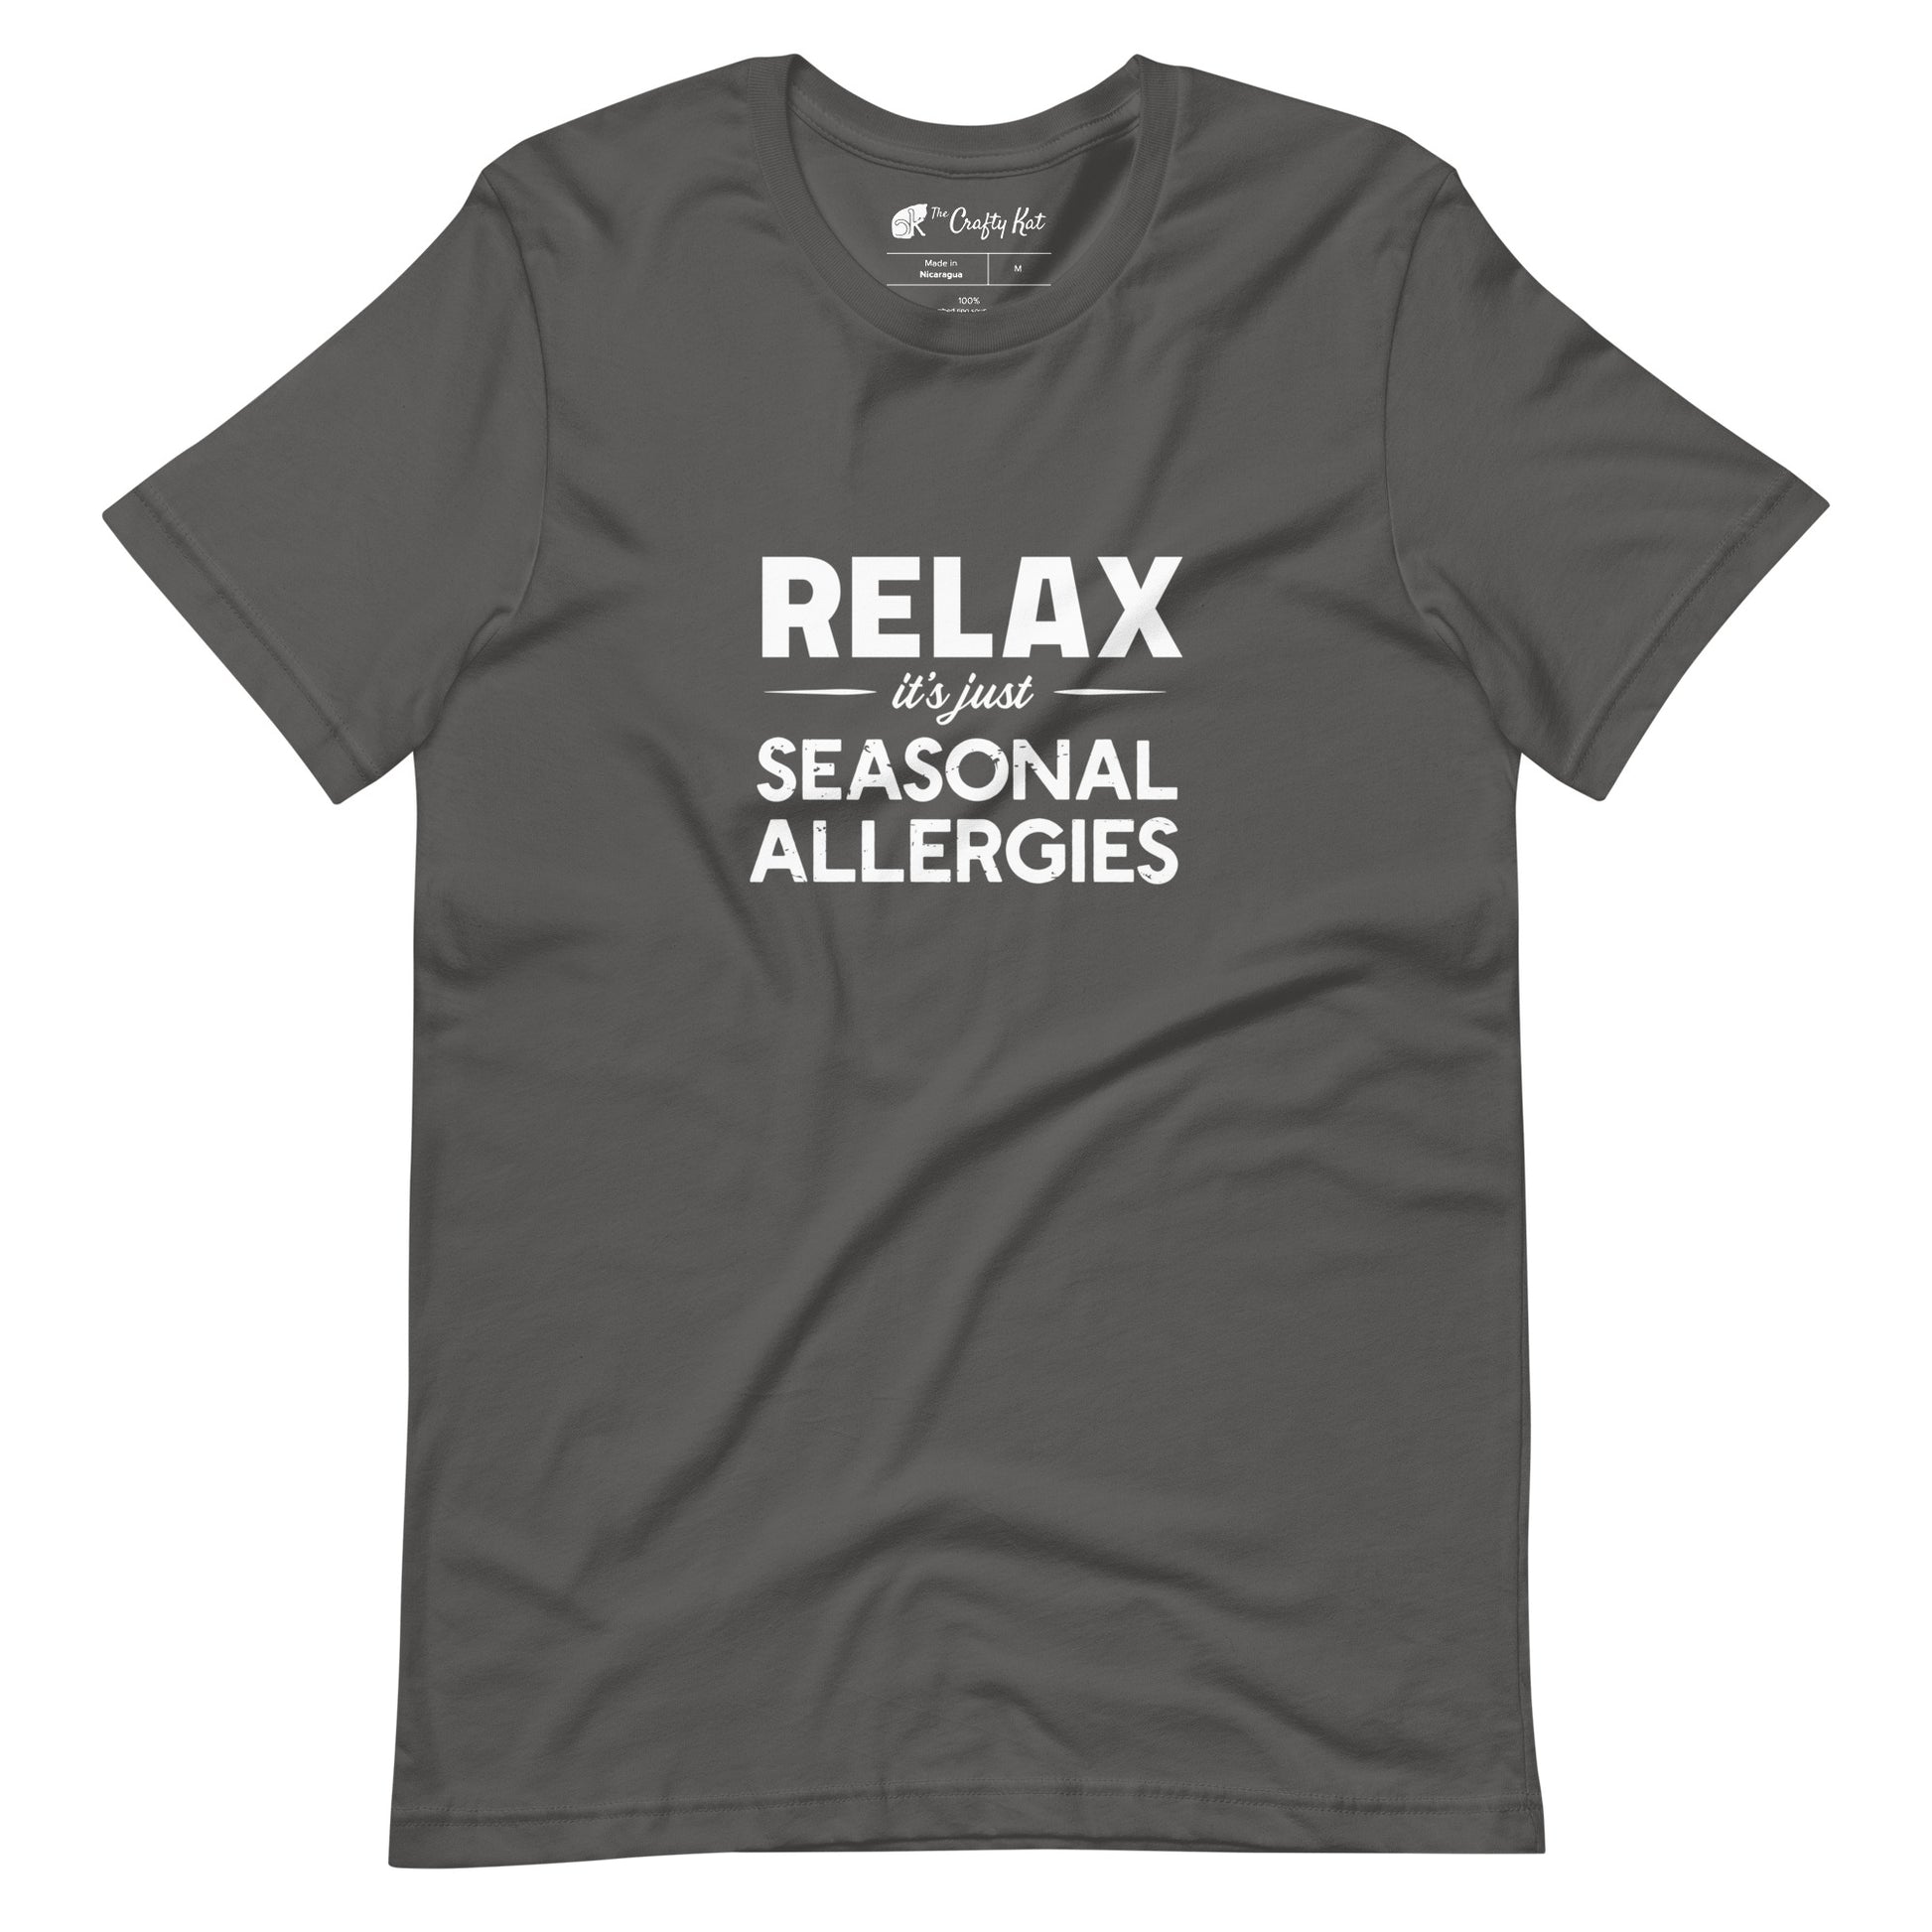 Asphalt grey t-shirt with white graphic: "RELAX it's just SEASONAL ALLERGIES"